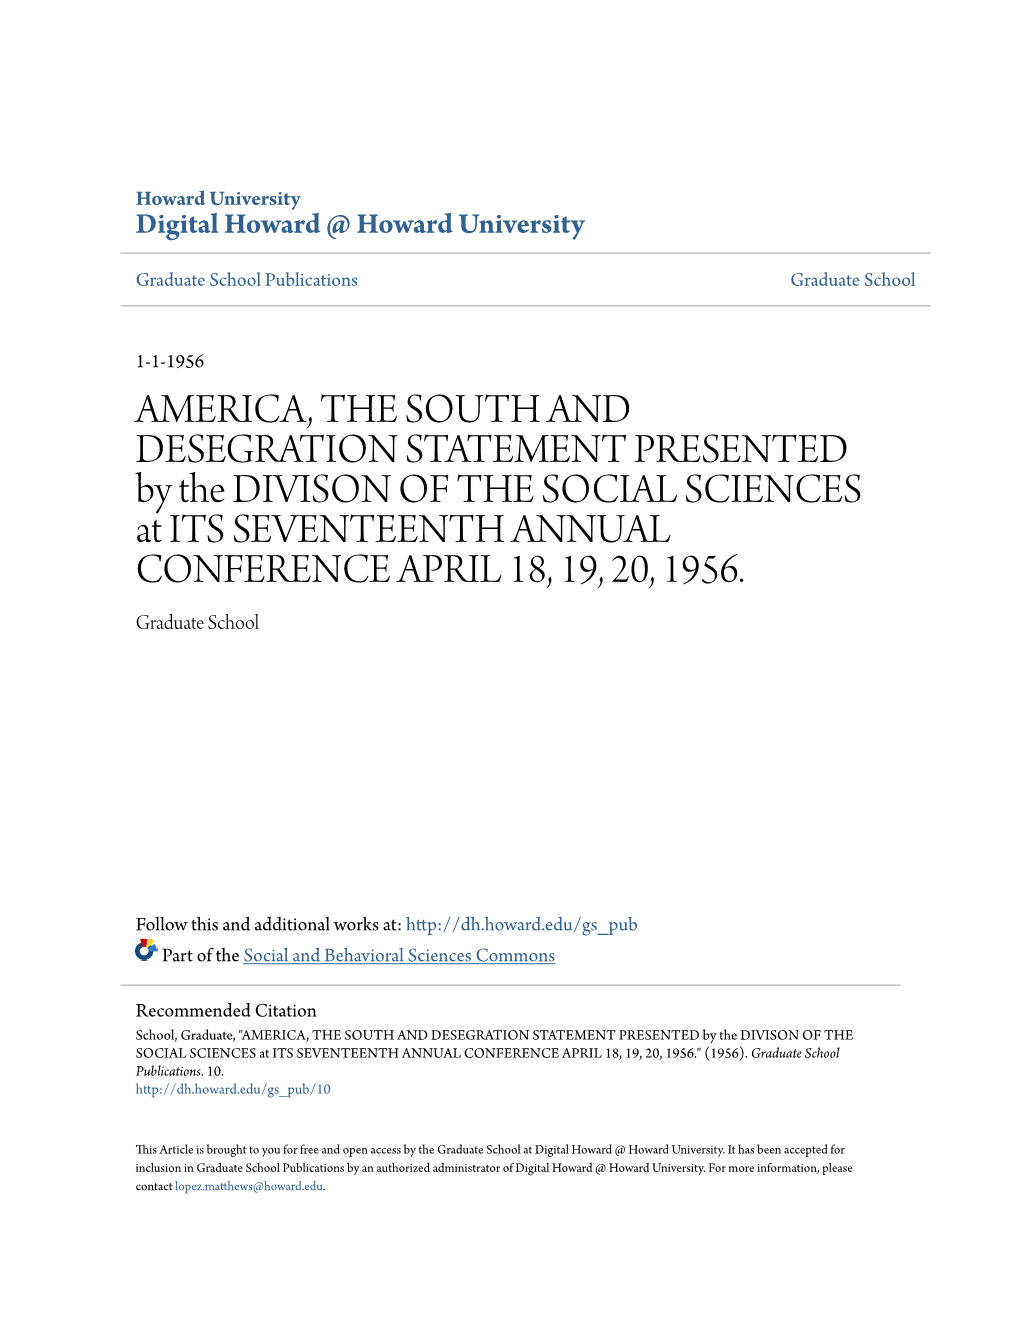 AMERICA, the SOUTH and DESEGRATION STATEMENT PRESENTED by the DIVISON of the SOCIAL SCIENCES at ITS SEVENTEENTH ANNUAL CONFERENCE APRIL 18, 19, 20, 1956